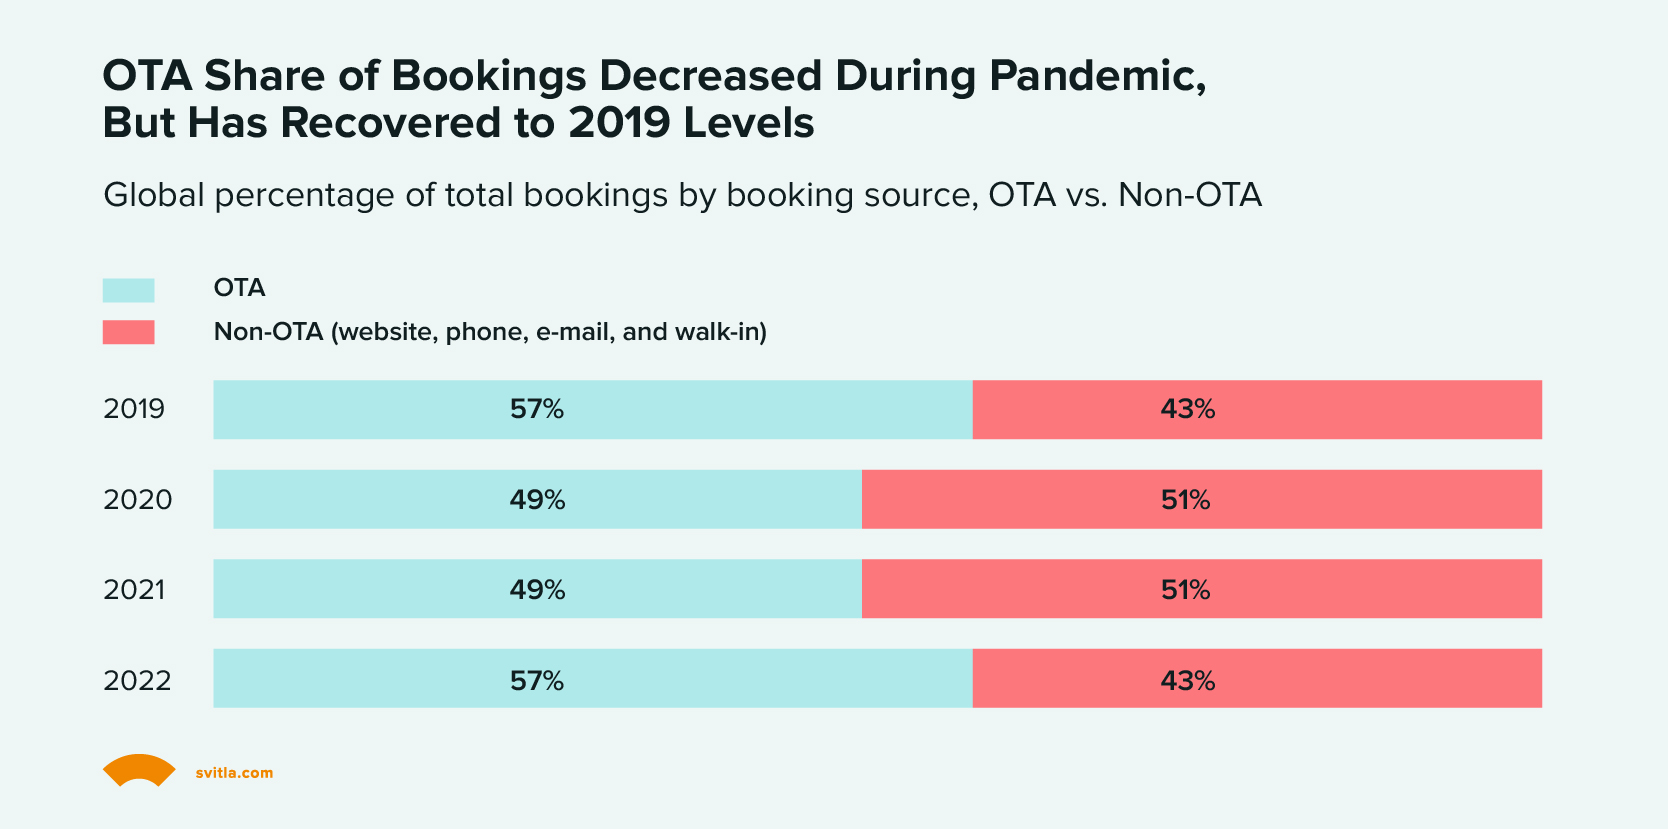 OTA Share of Bookings Decreased During Pandemic, But Has Recovered to 2019 Levels